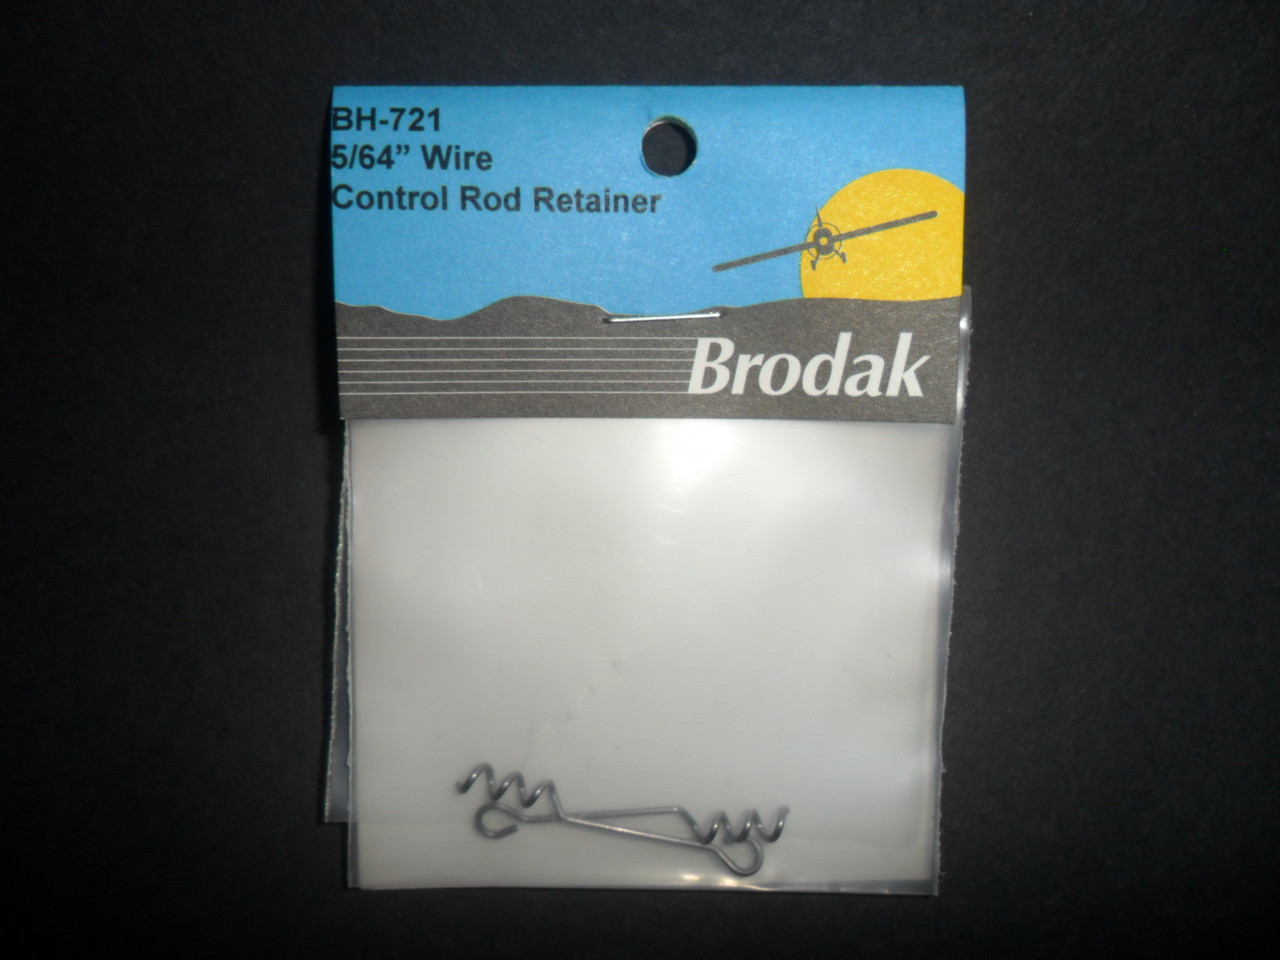 Control Rod Retainer - 5/64" (2.0mm) Wire - (BH-721)